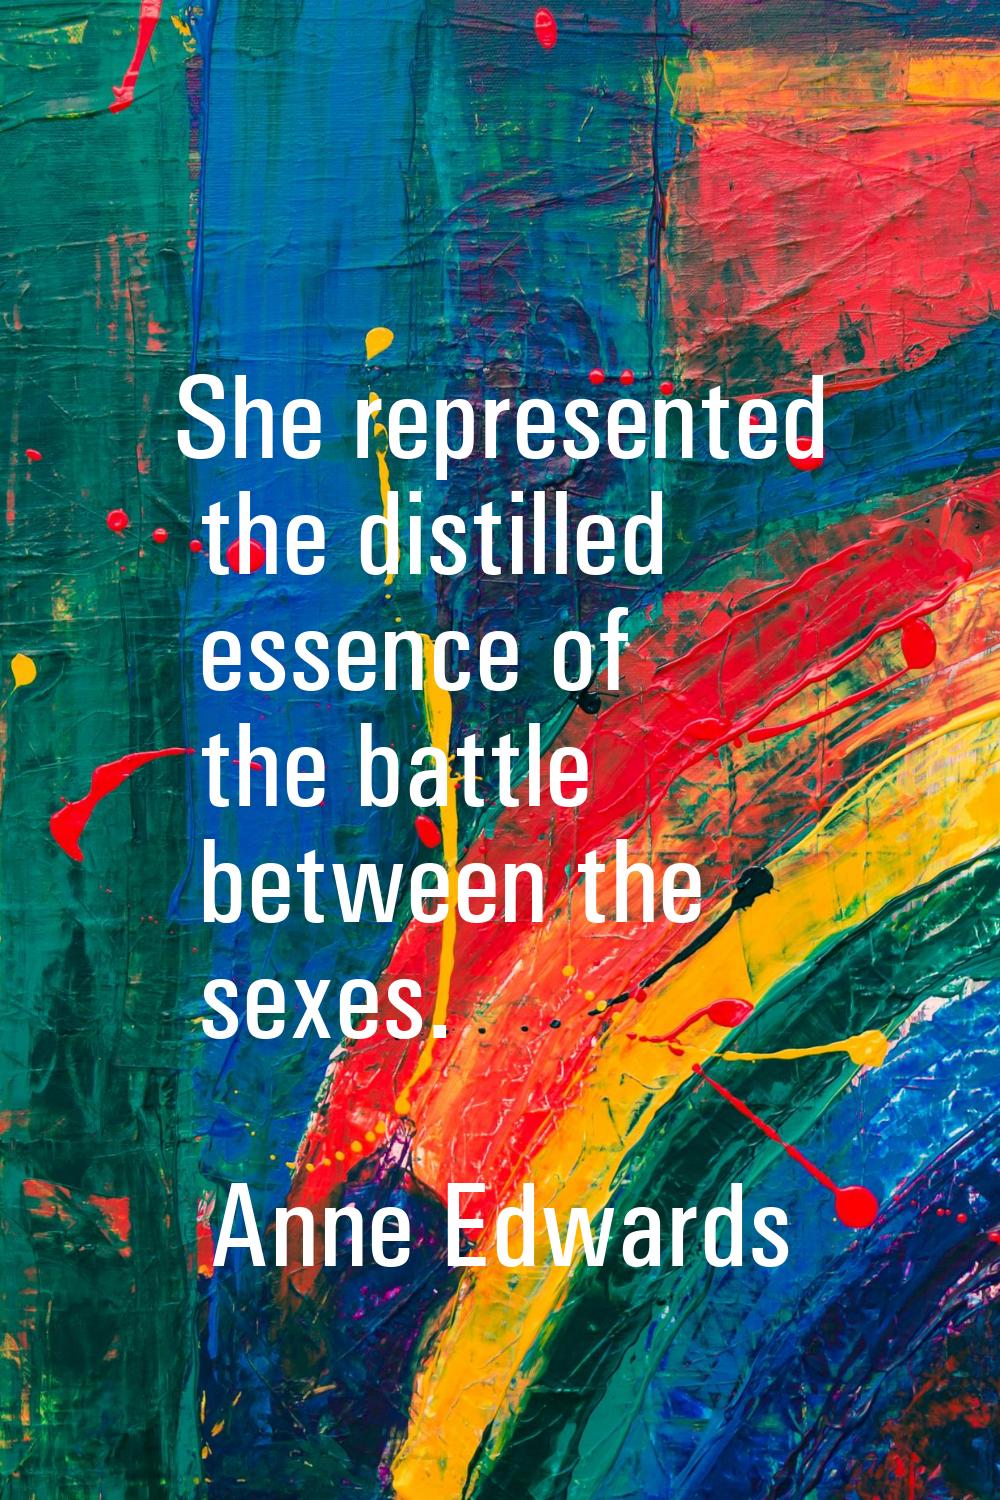 She represented the distilled essence of the battle between the sexes.